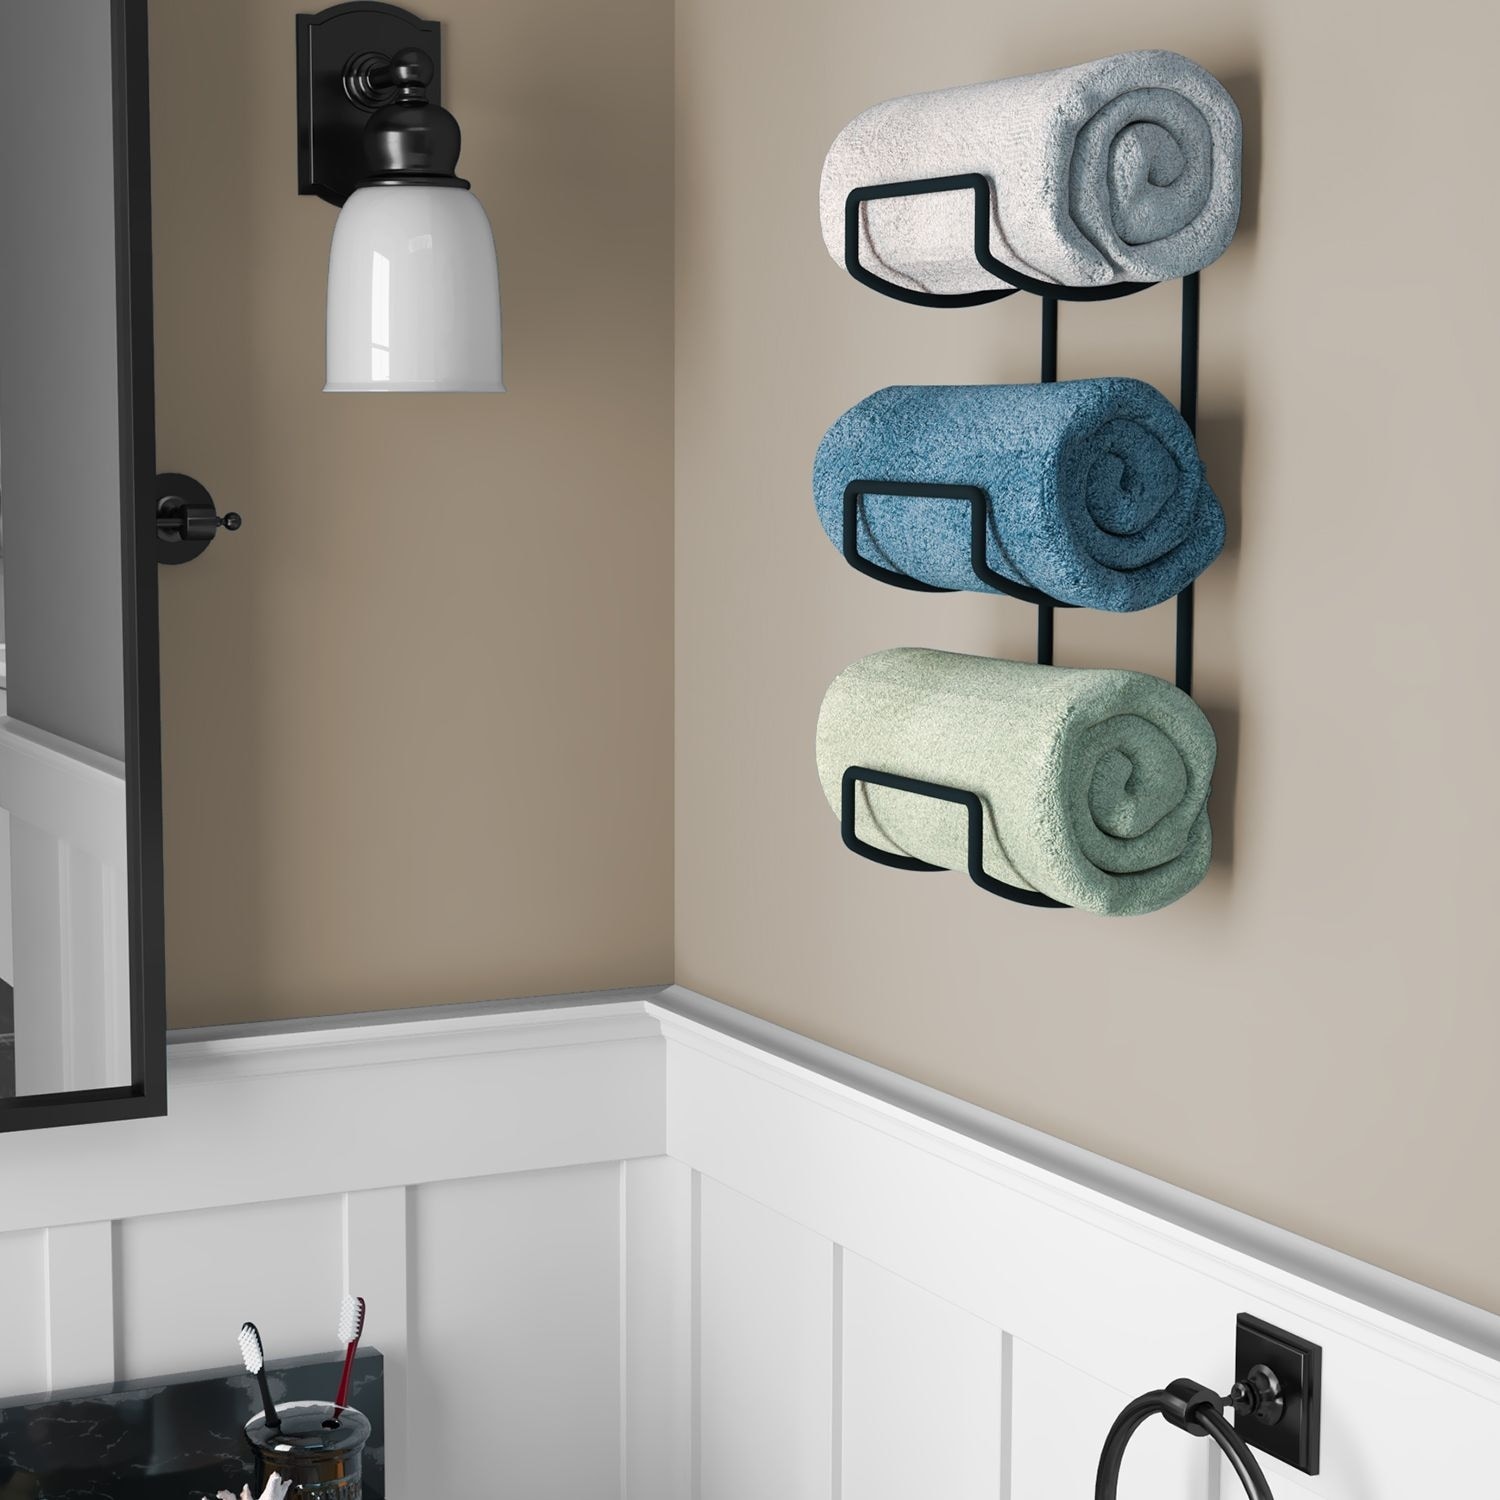 https://ak1.ostkcdn.com/images/products/is/images/direct/69f35f4272d2c3975172c8ad4a8e087b9cfbce18/Wallniture-Moduwine-Wall-Mount-Towel-Rack-for-Bathroom-Wall-Decor%2C-3-Sectional.jpg